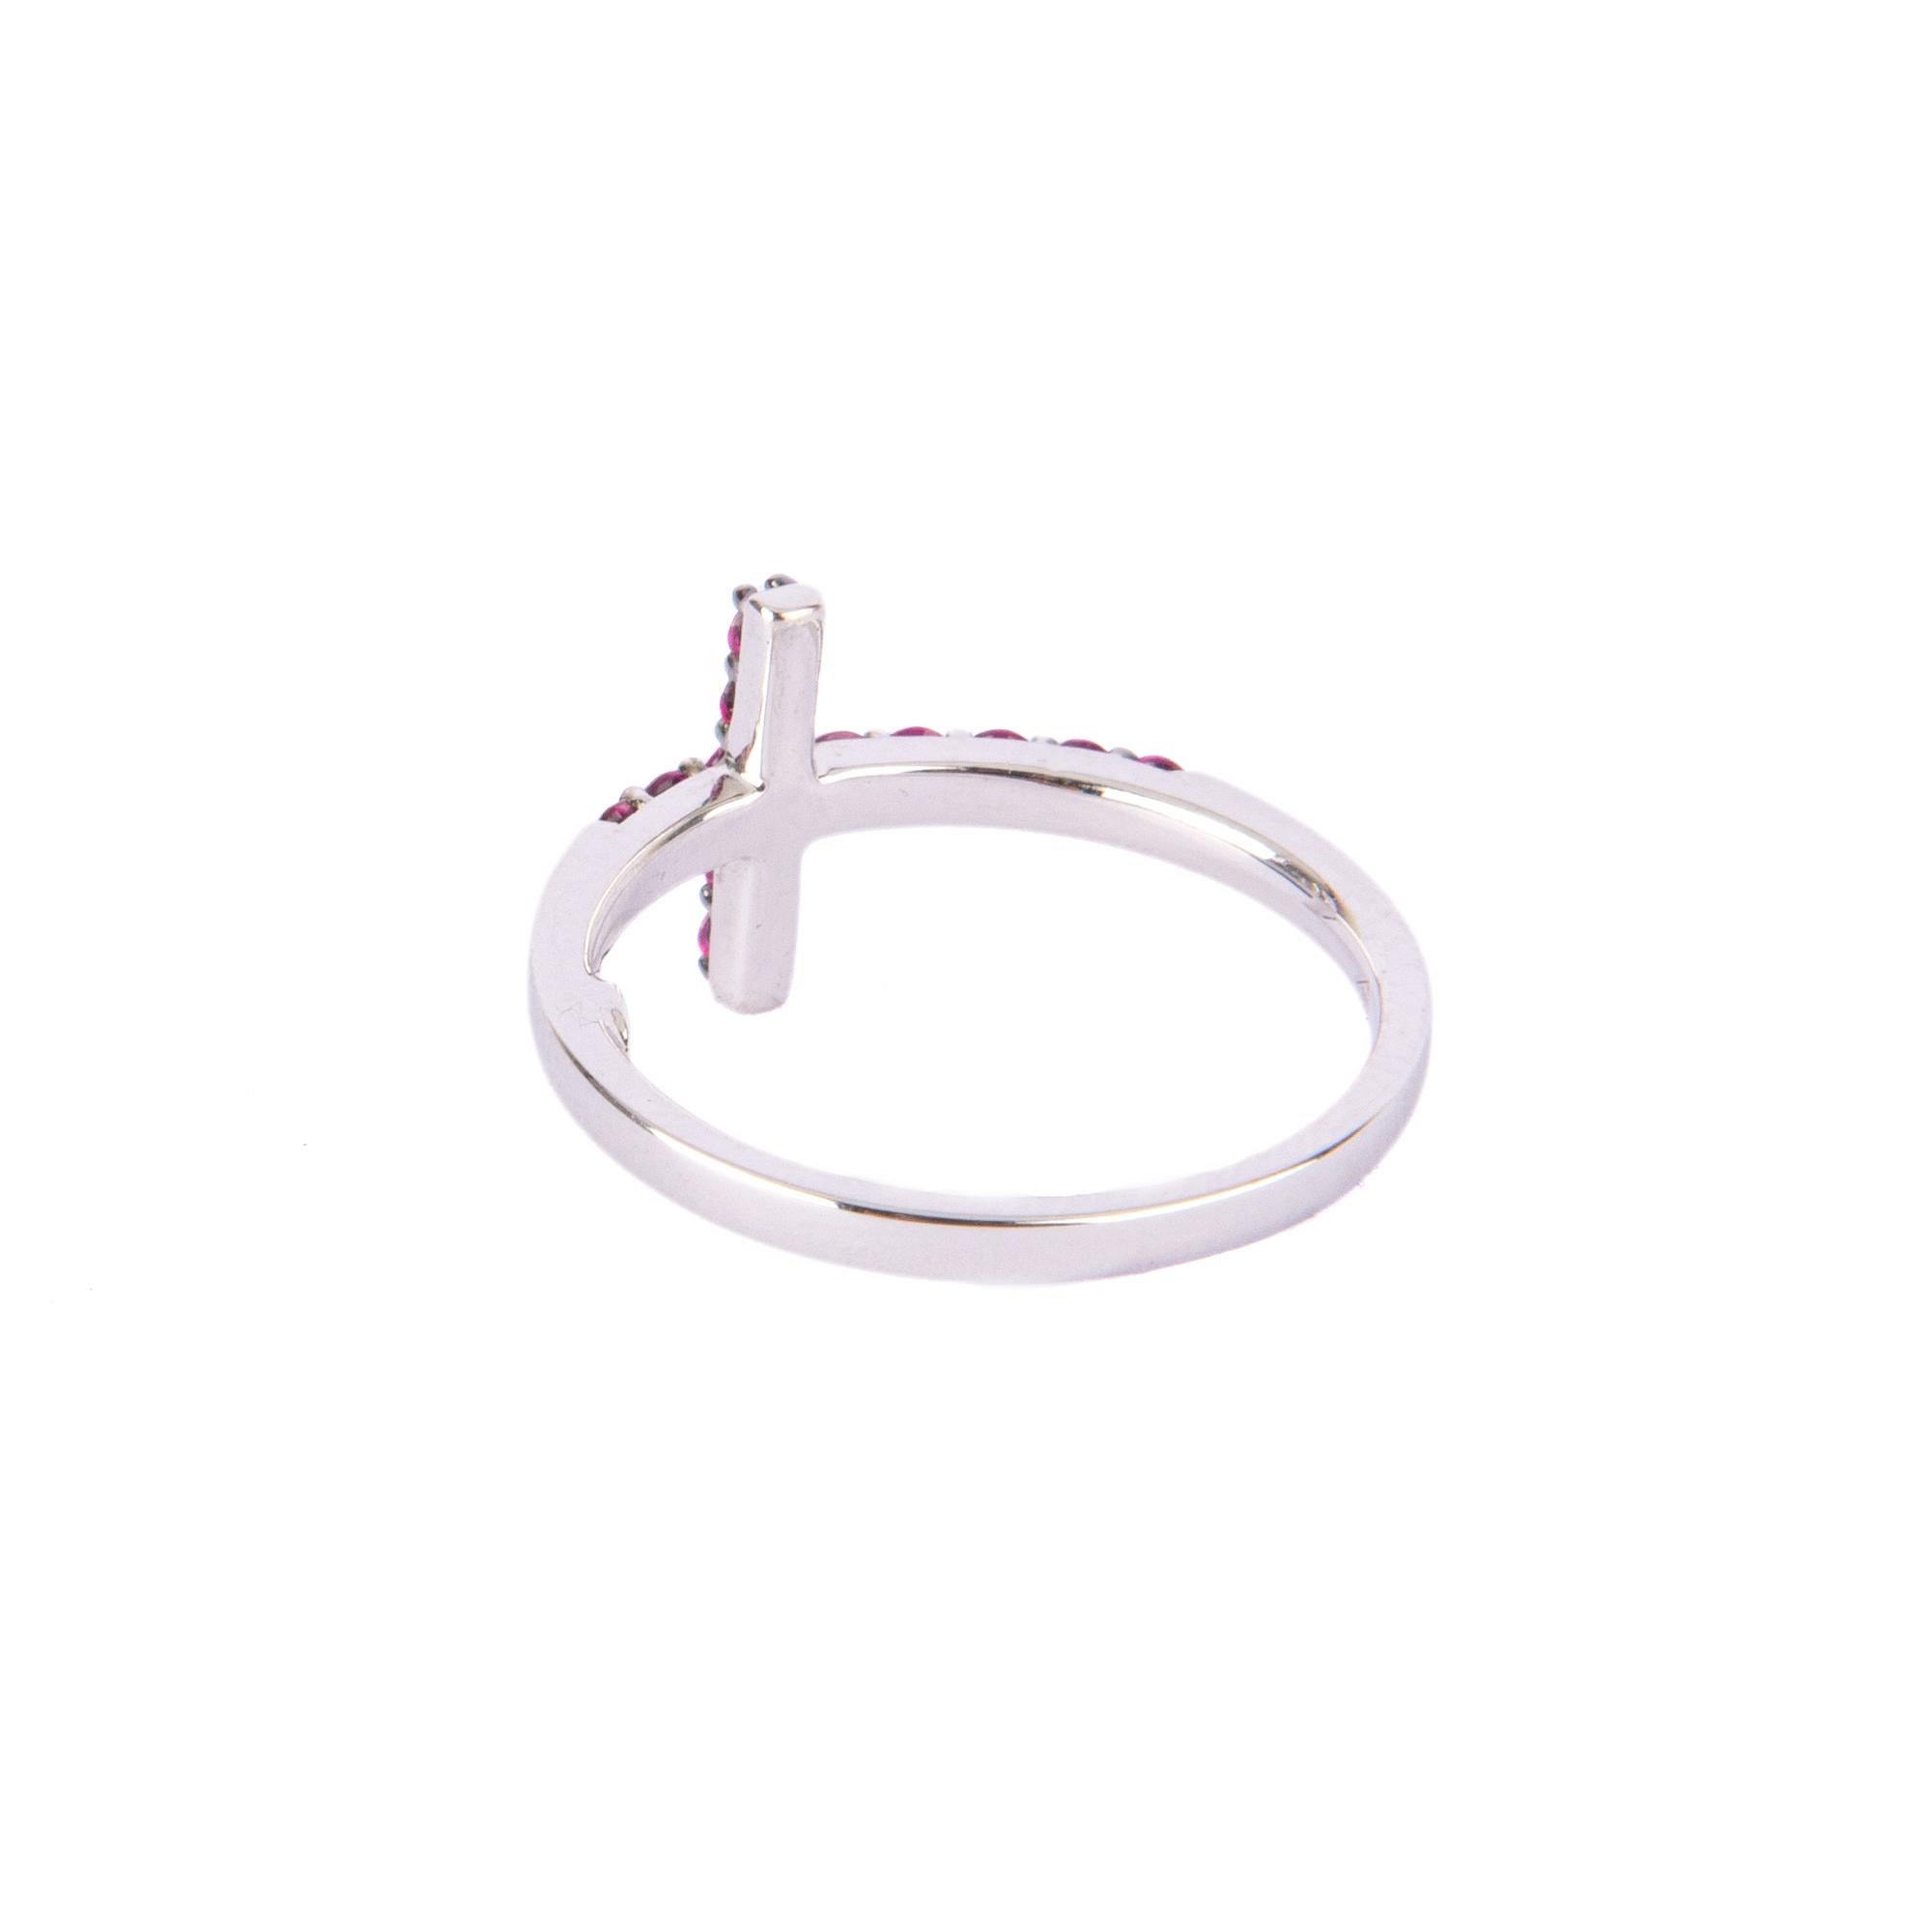 Modern 18 Karat White Gold Cross Ring Feature with Rubys